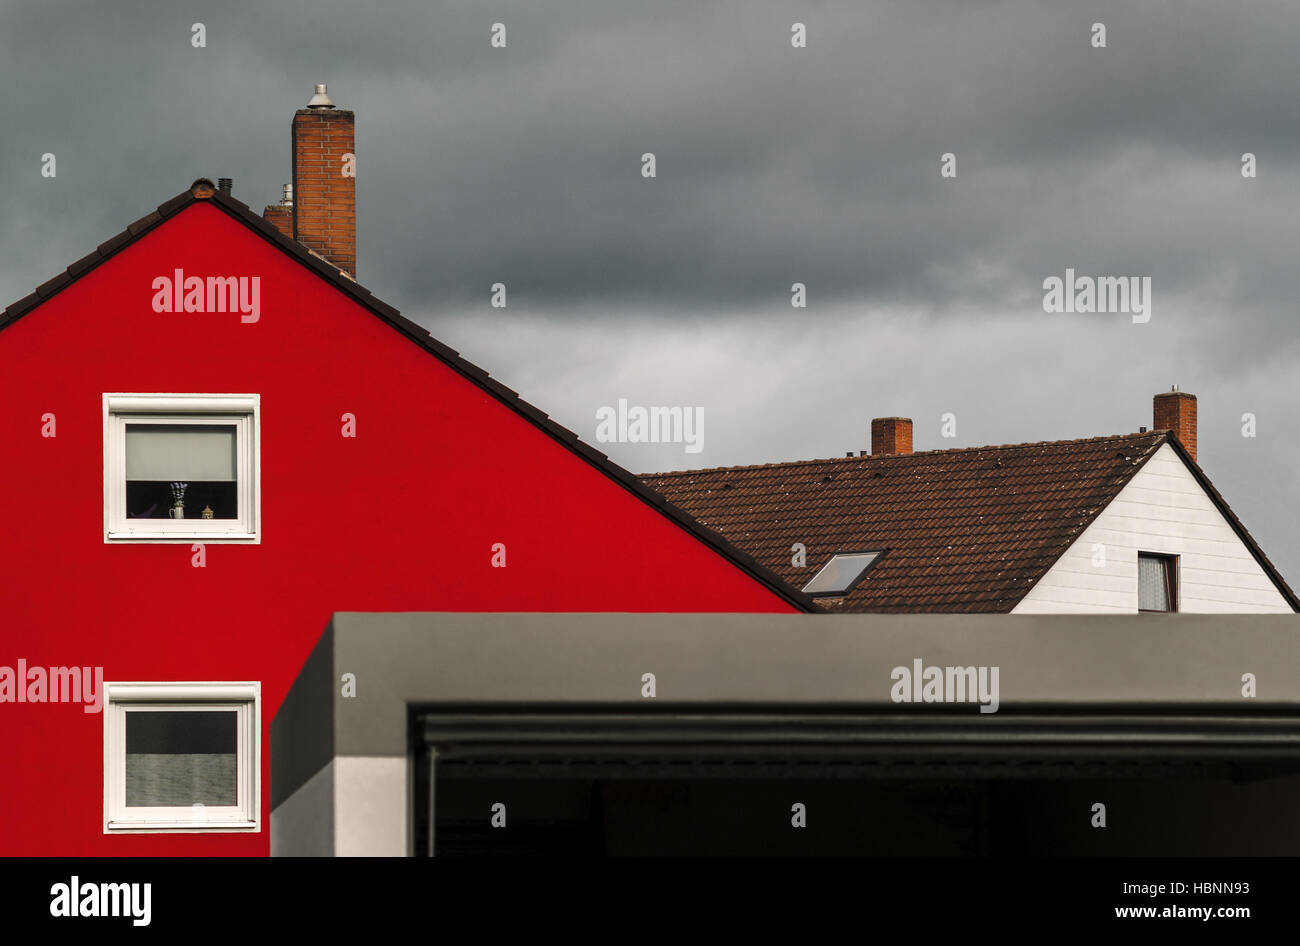 Style of roofs Stock Photo